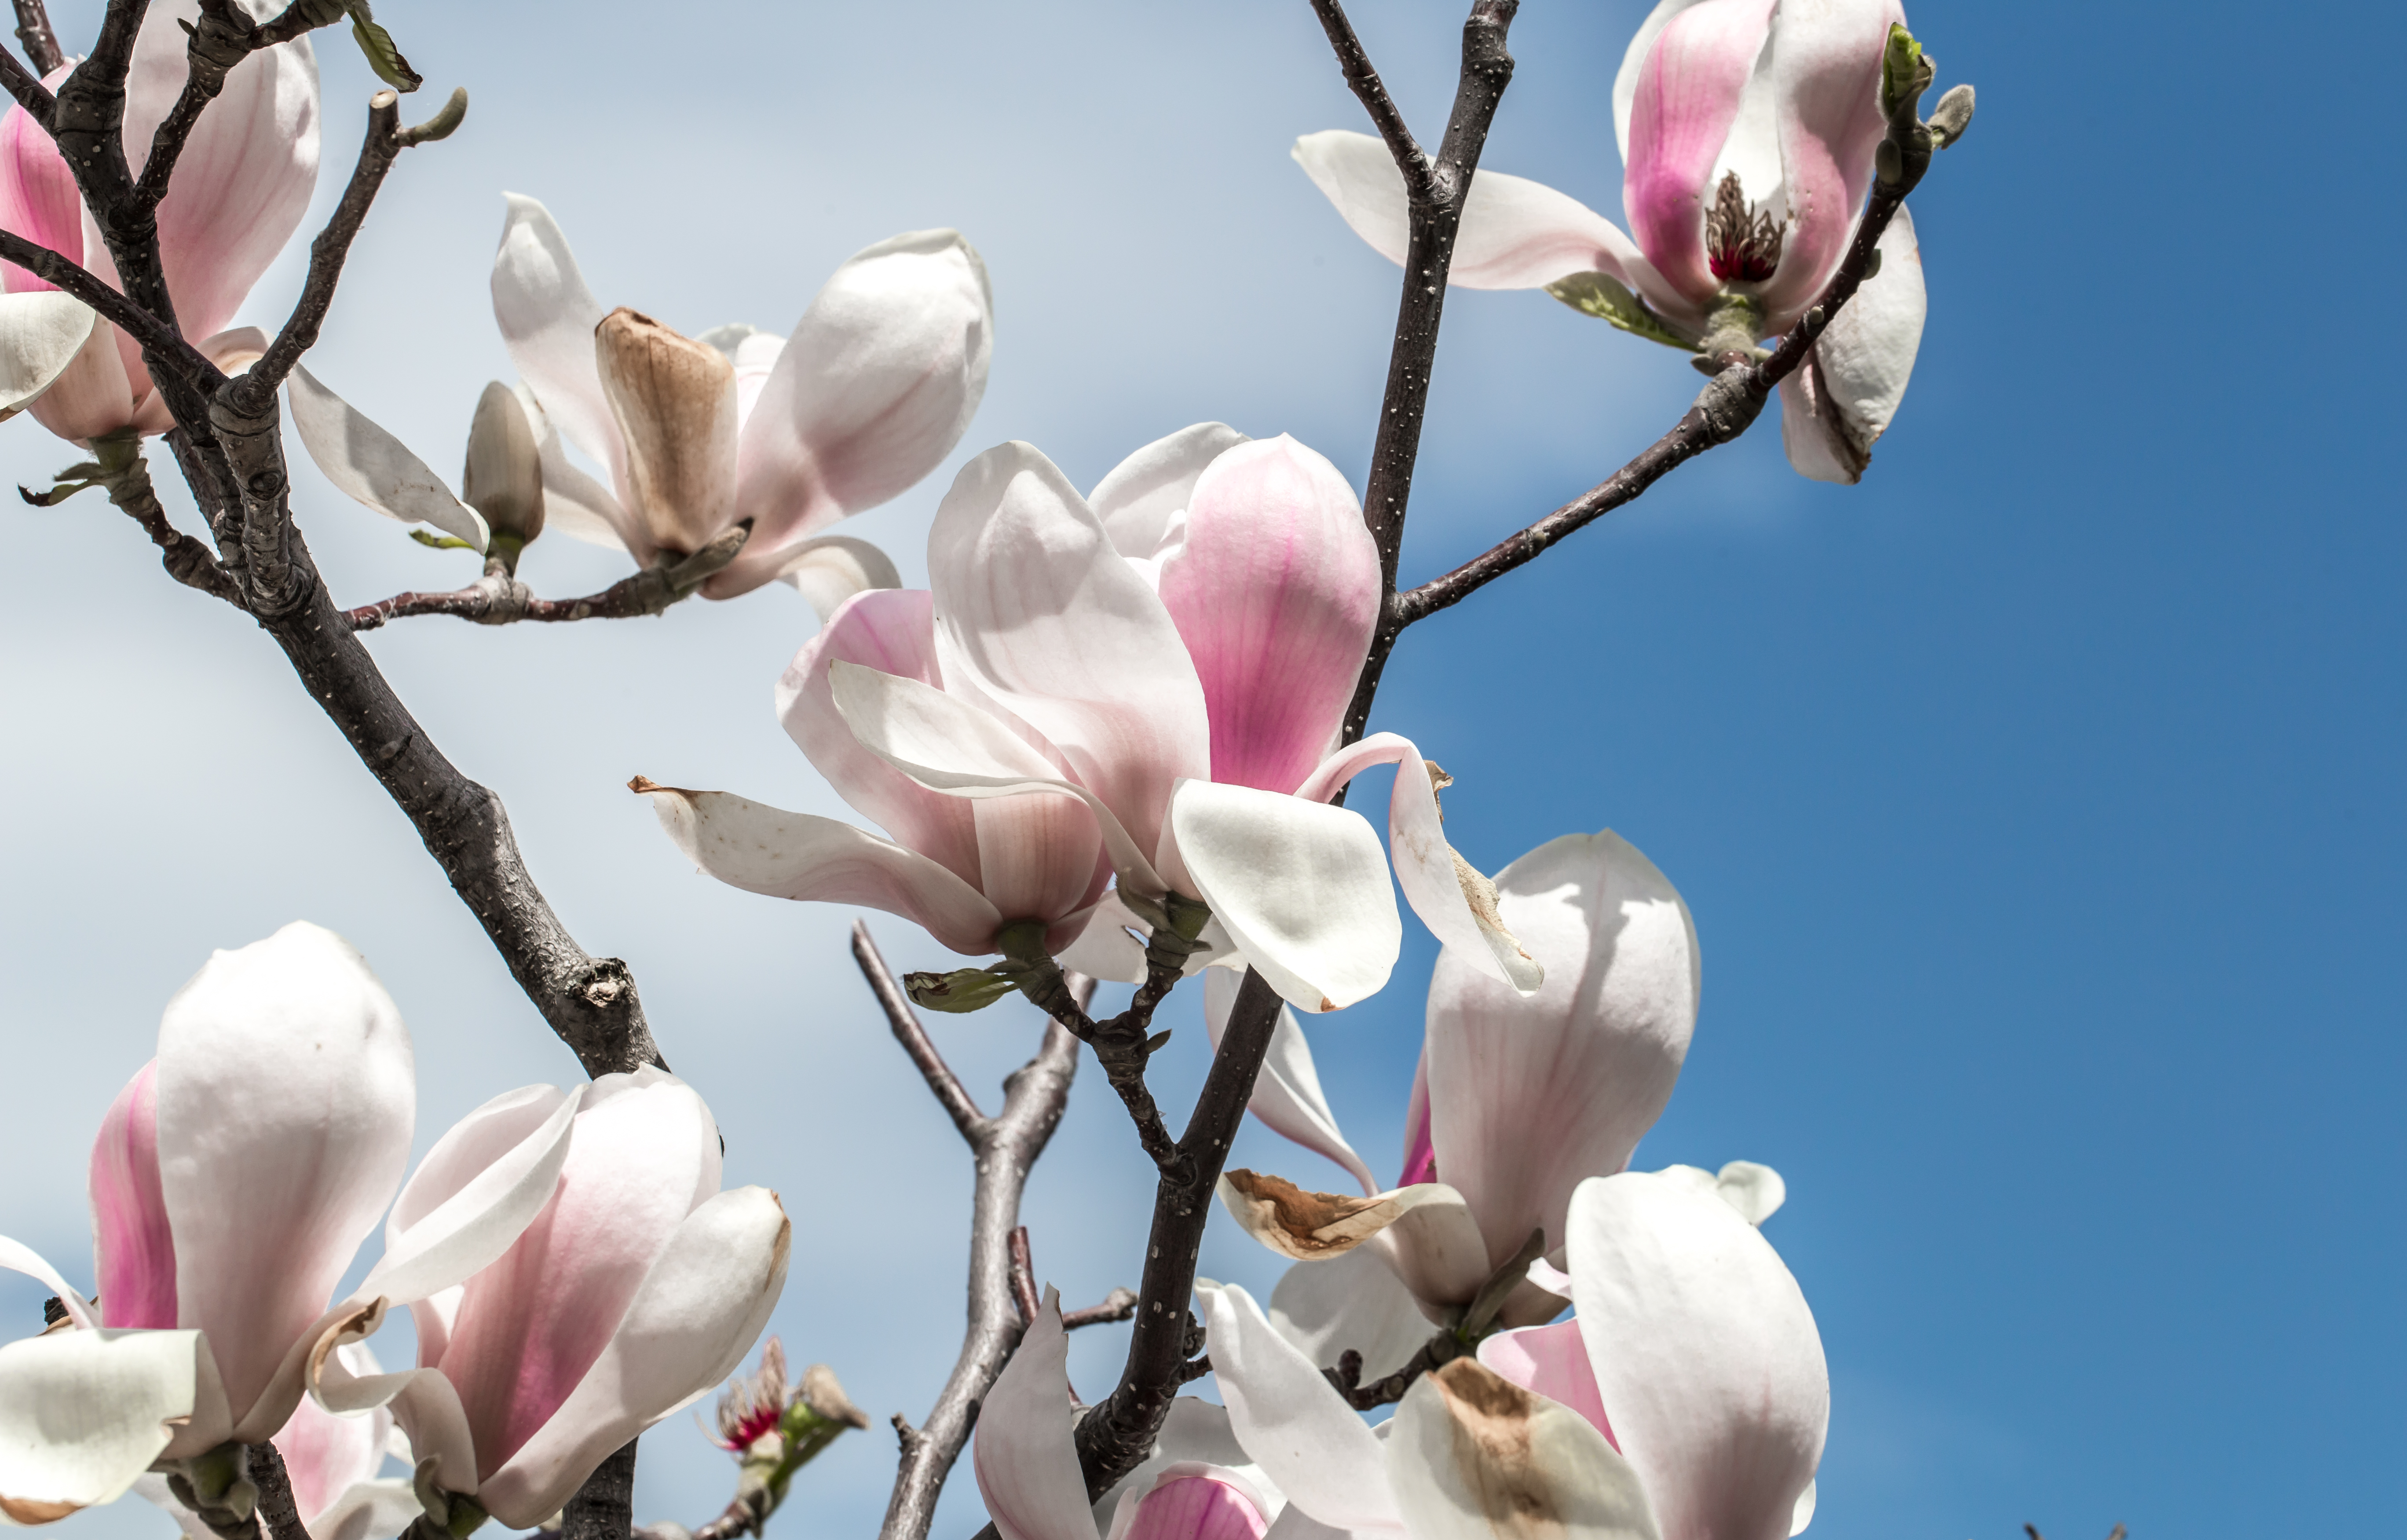 flowering-magnolia-tree-close-up-concept-flowers-spring